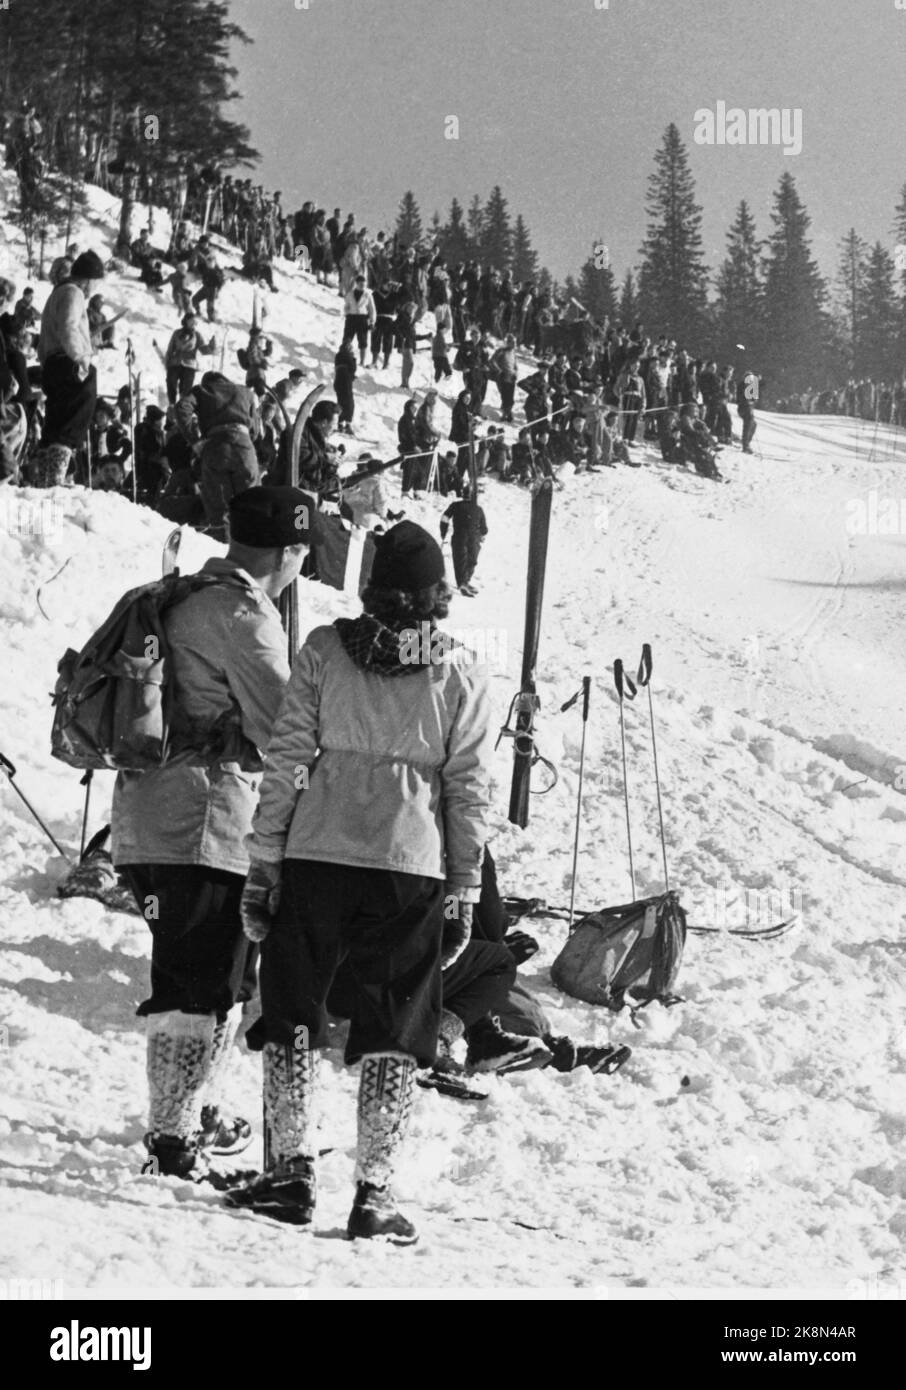 Winter Olympics 1952, Oslo. Slalo for women and men went in the Rødkleiva. Here from the ground, with many spectators dressed in contemporary 50s fashion, with anorak, nodding, beexi stitches, backpacks and hats. People had skis and enjoyed themselves in the ground in the sun. Photo: NTB / Archive / NTB Stock Photo